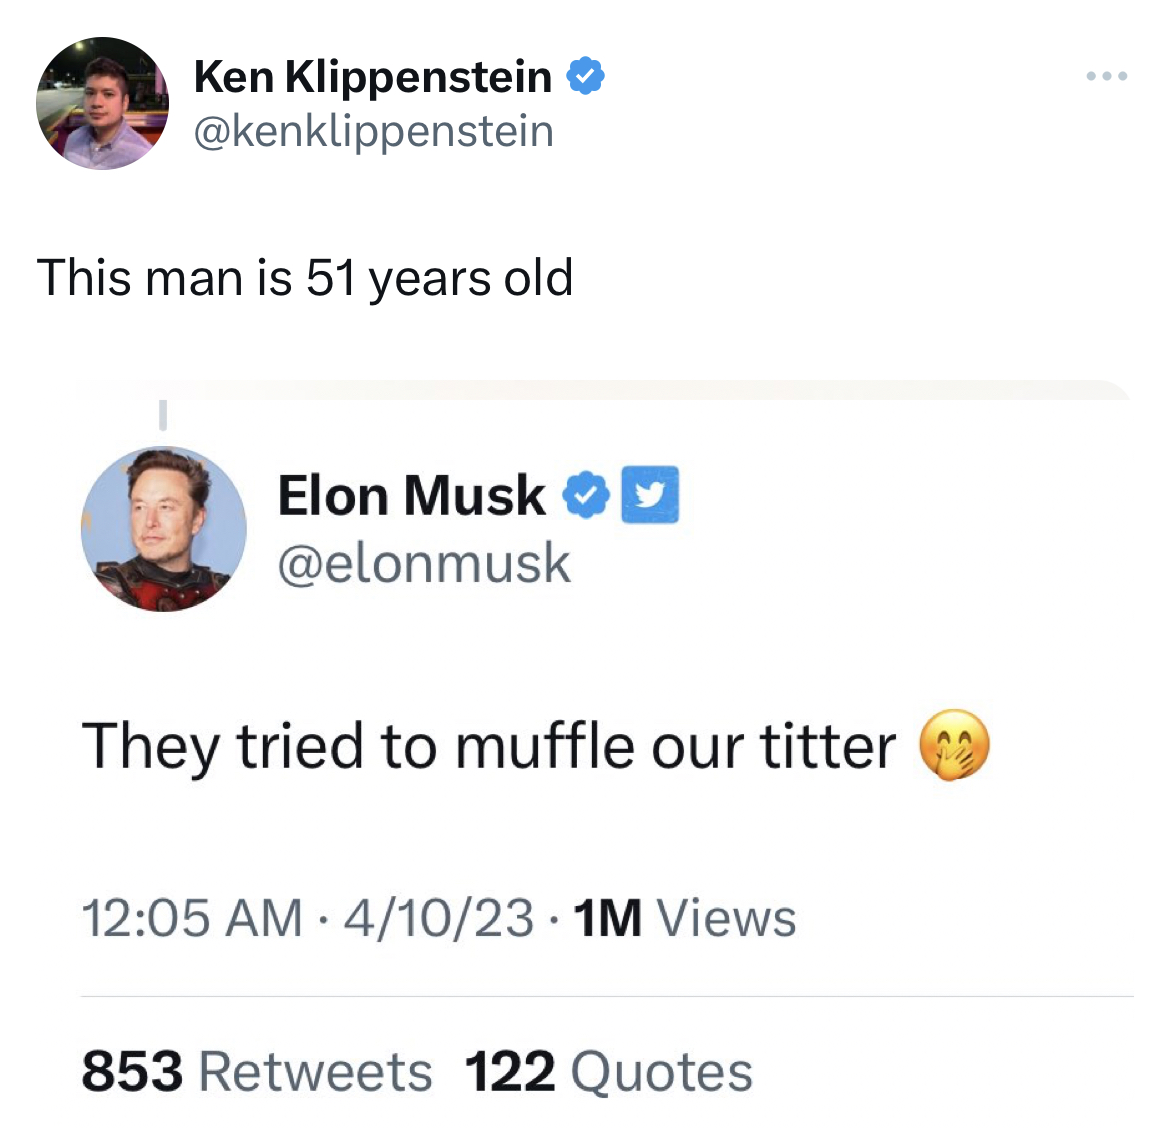 savage tweets - elon musk halli tweets - Ken Klippenstein > This man is 51 years old Elon Musk They tried to muffle our titter 41023 1M Views 853 122 Quotes